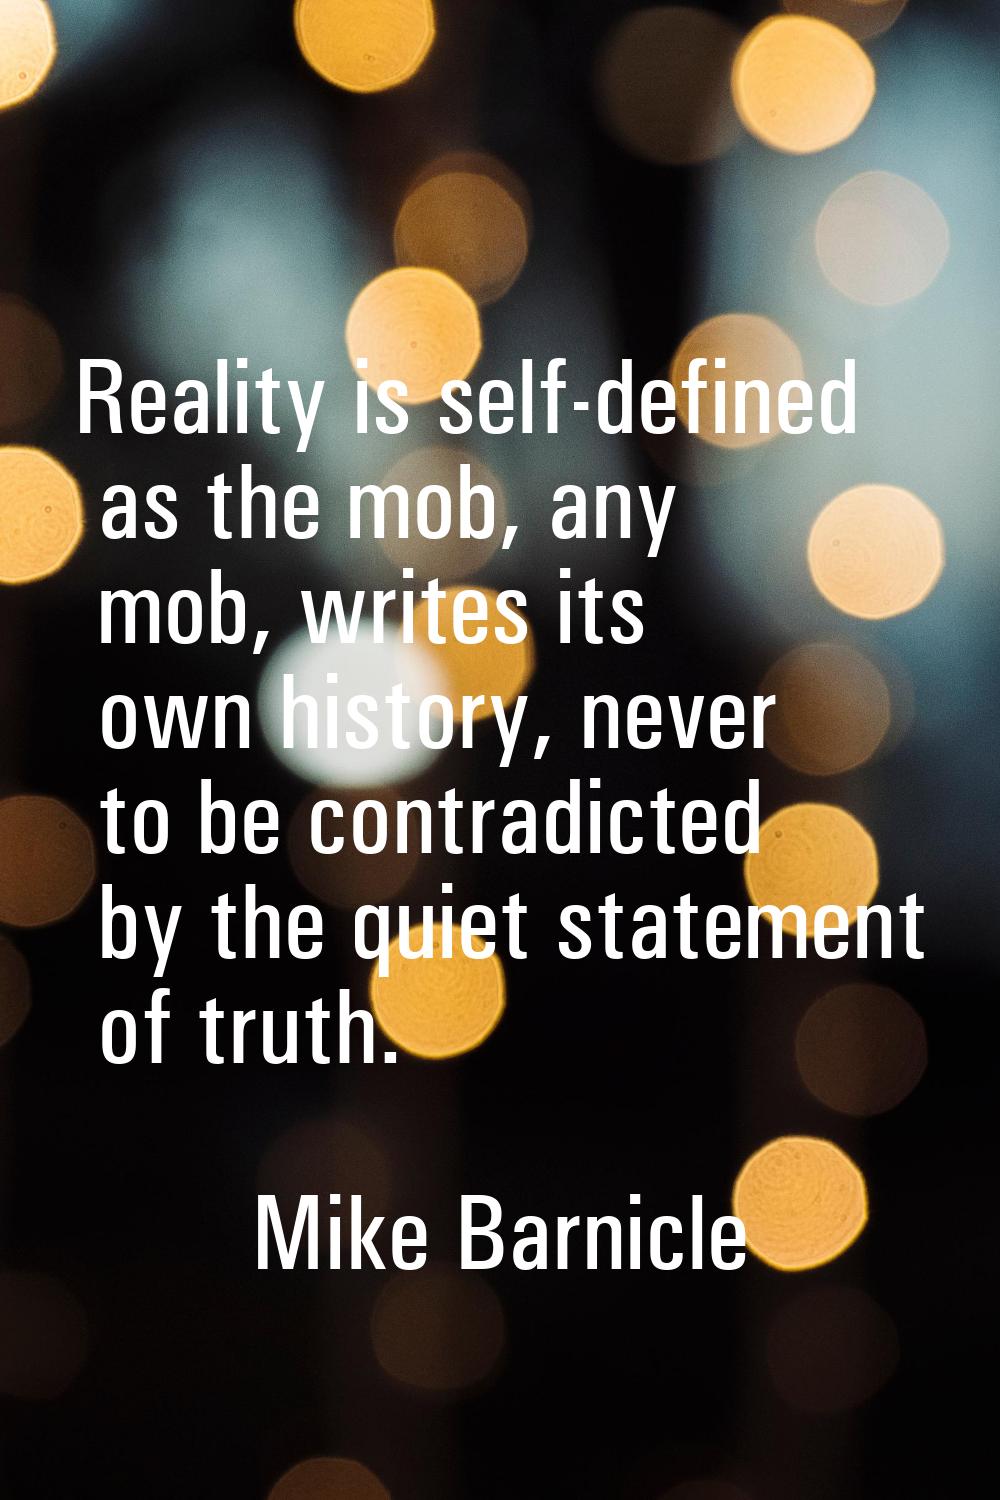 Reality is self-defined as the mob, any mob, writes its own history, never to be contradicted by th